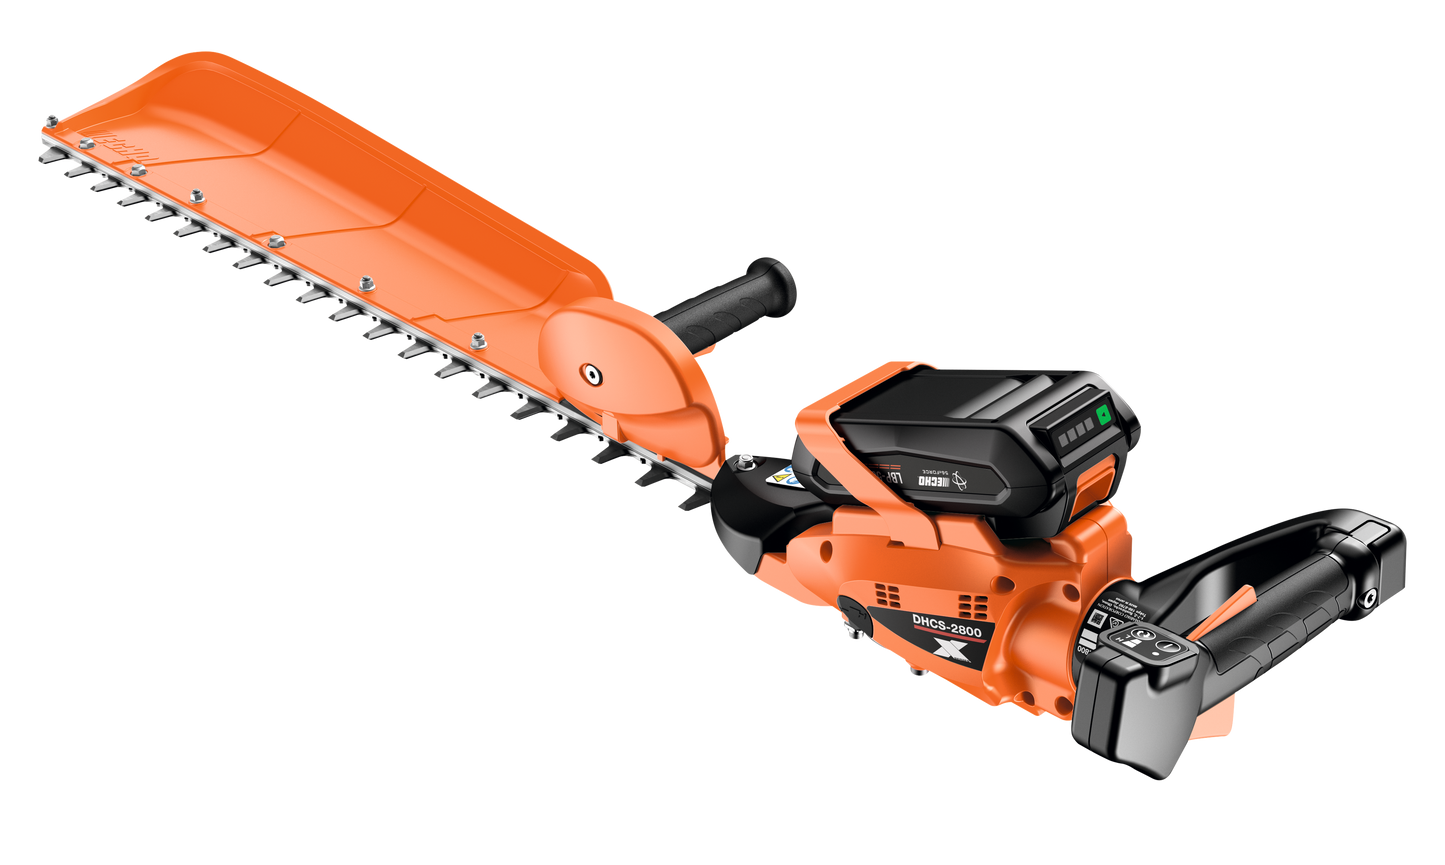 DHCS-2800 Single Sided Hedge Trimmer